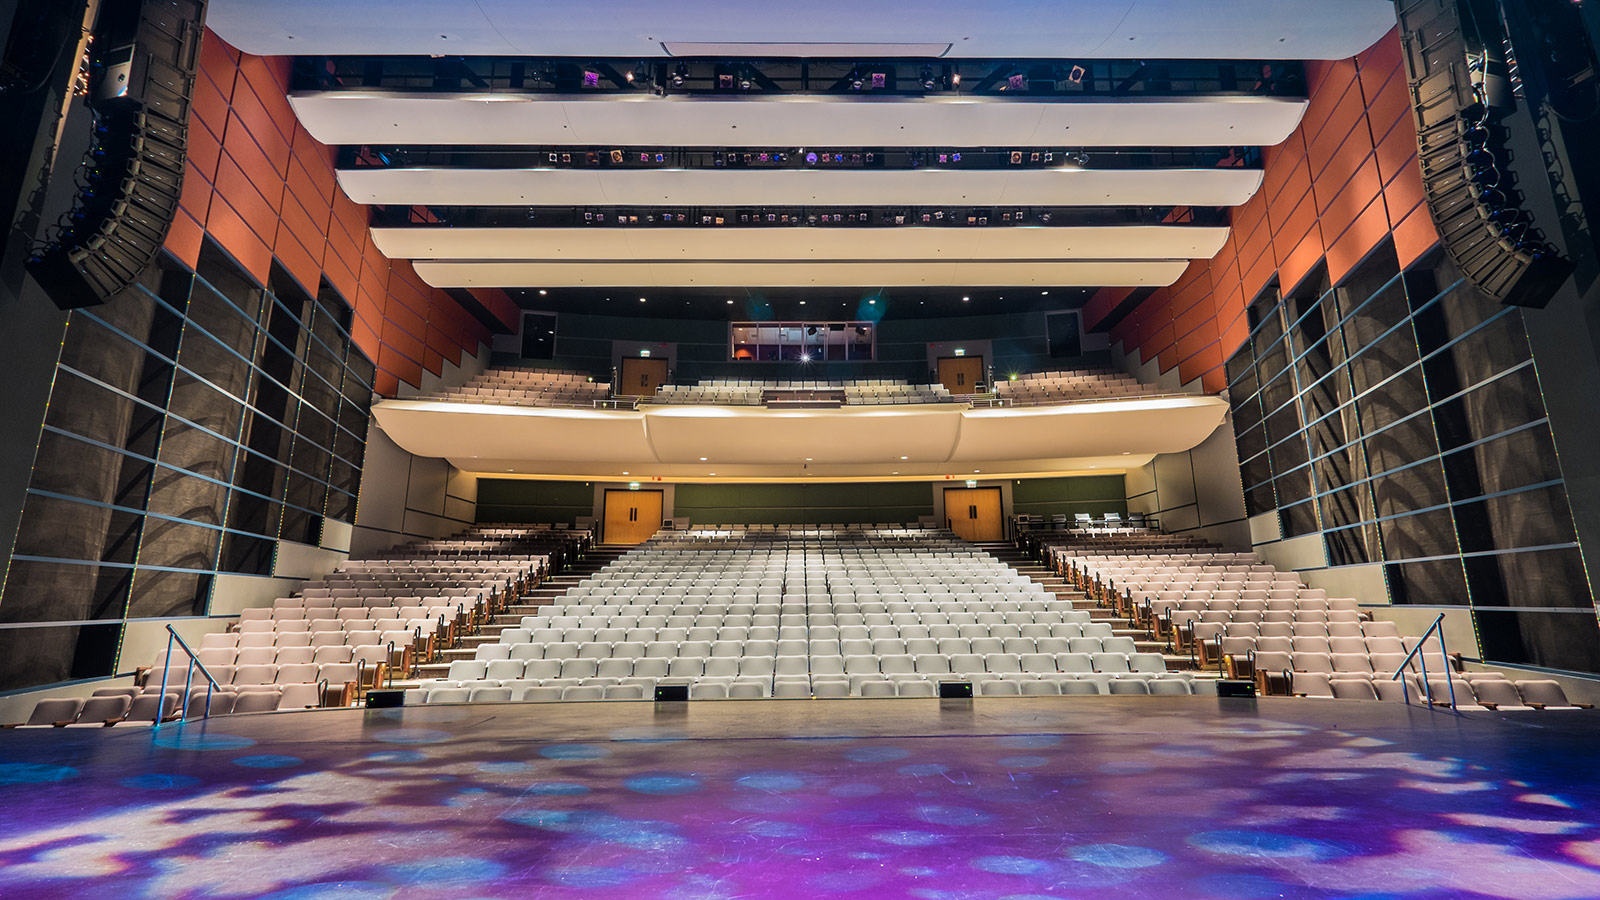 Centrepointe Theatre Upgrades with Canada's First Meyer Sound LEOPARD System